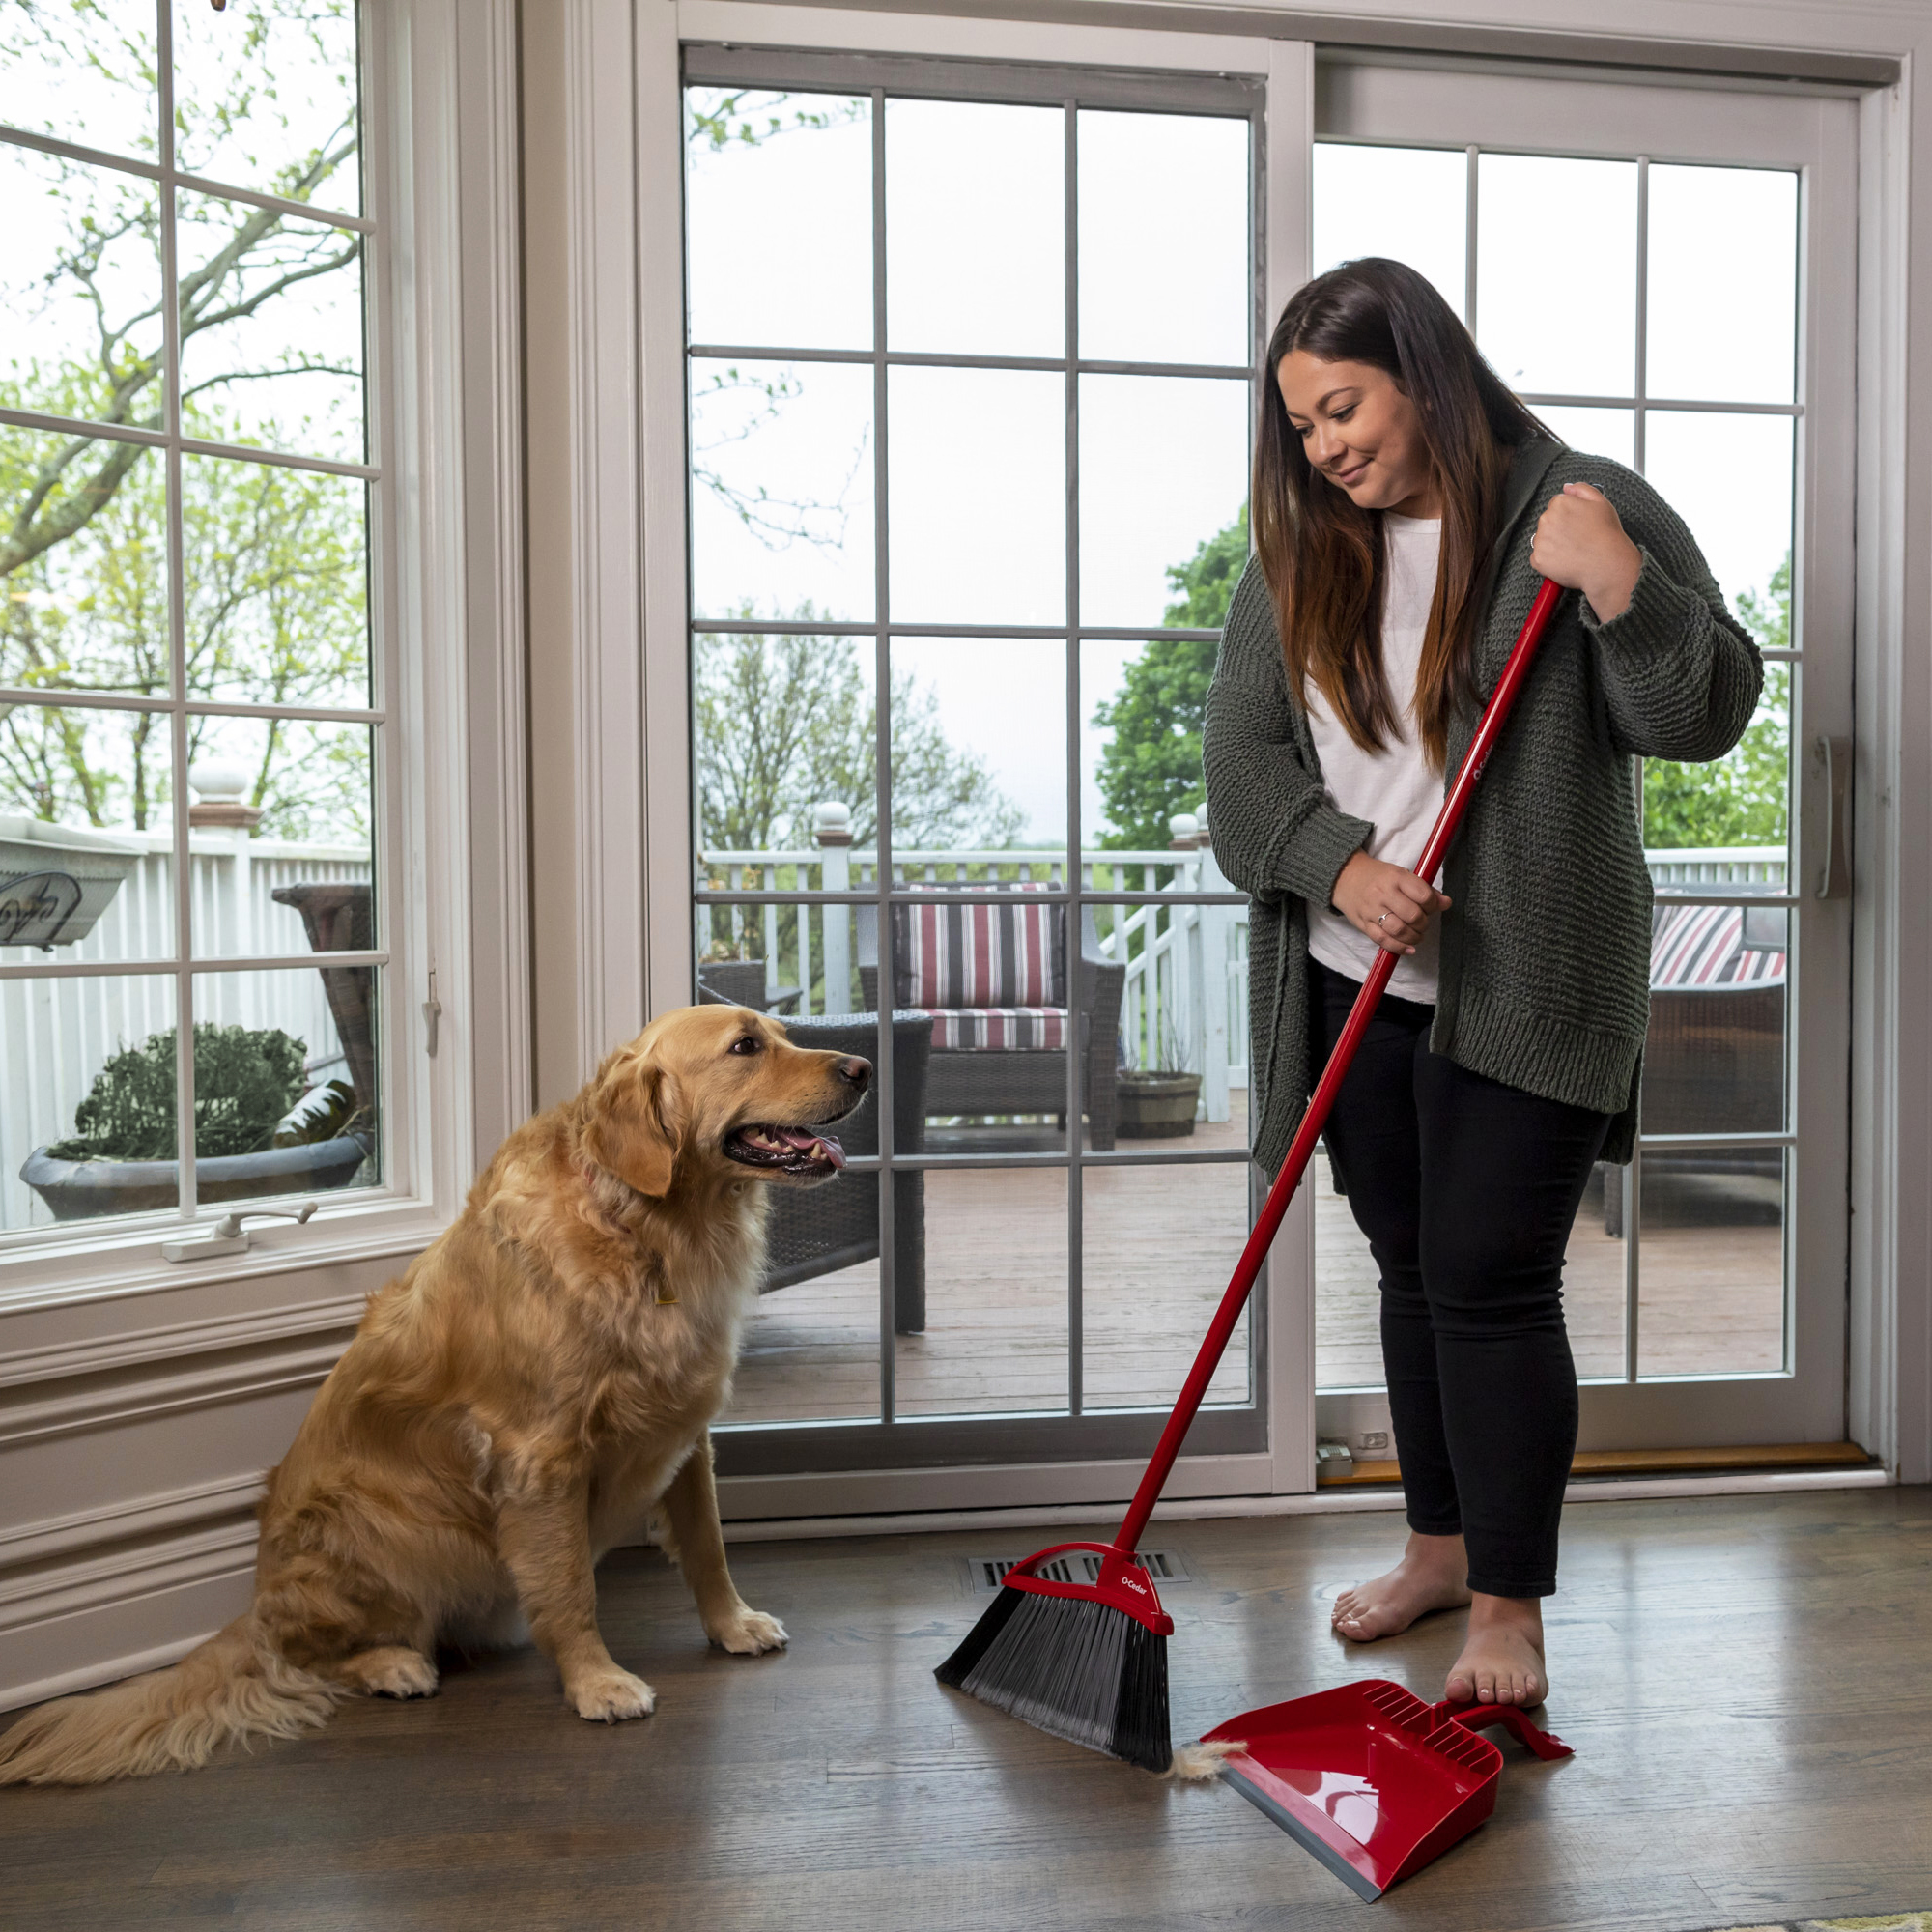 3 Best Brooms For Sweeping Up Pet Hair (7 Tested On Dogs!) - Dog Lab